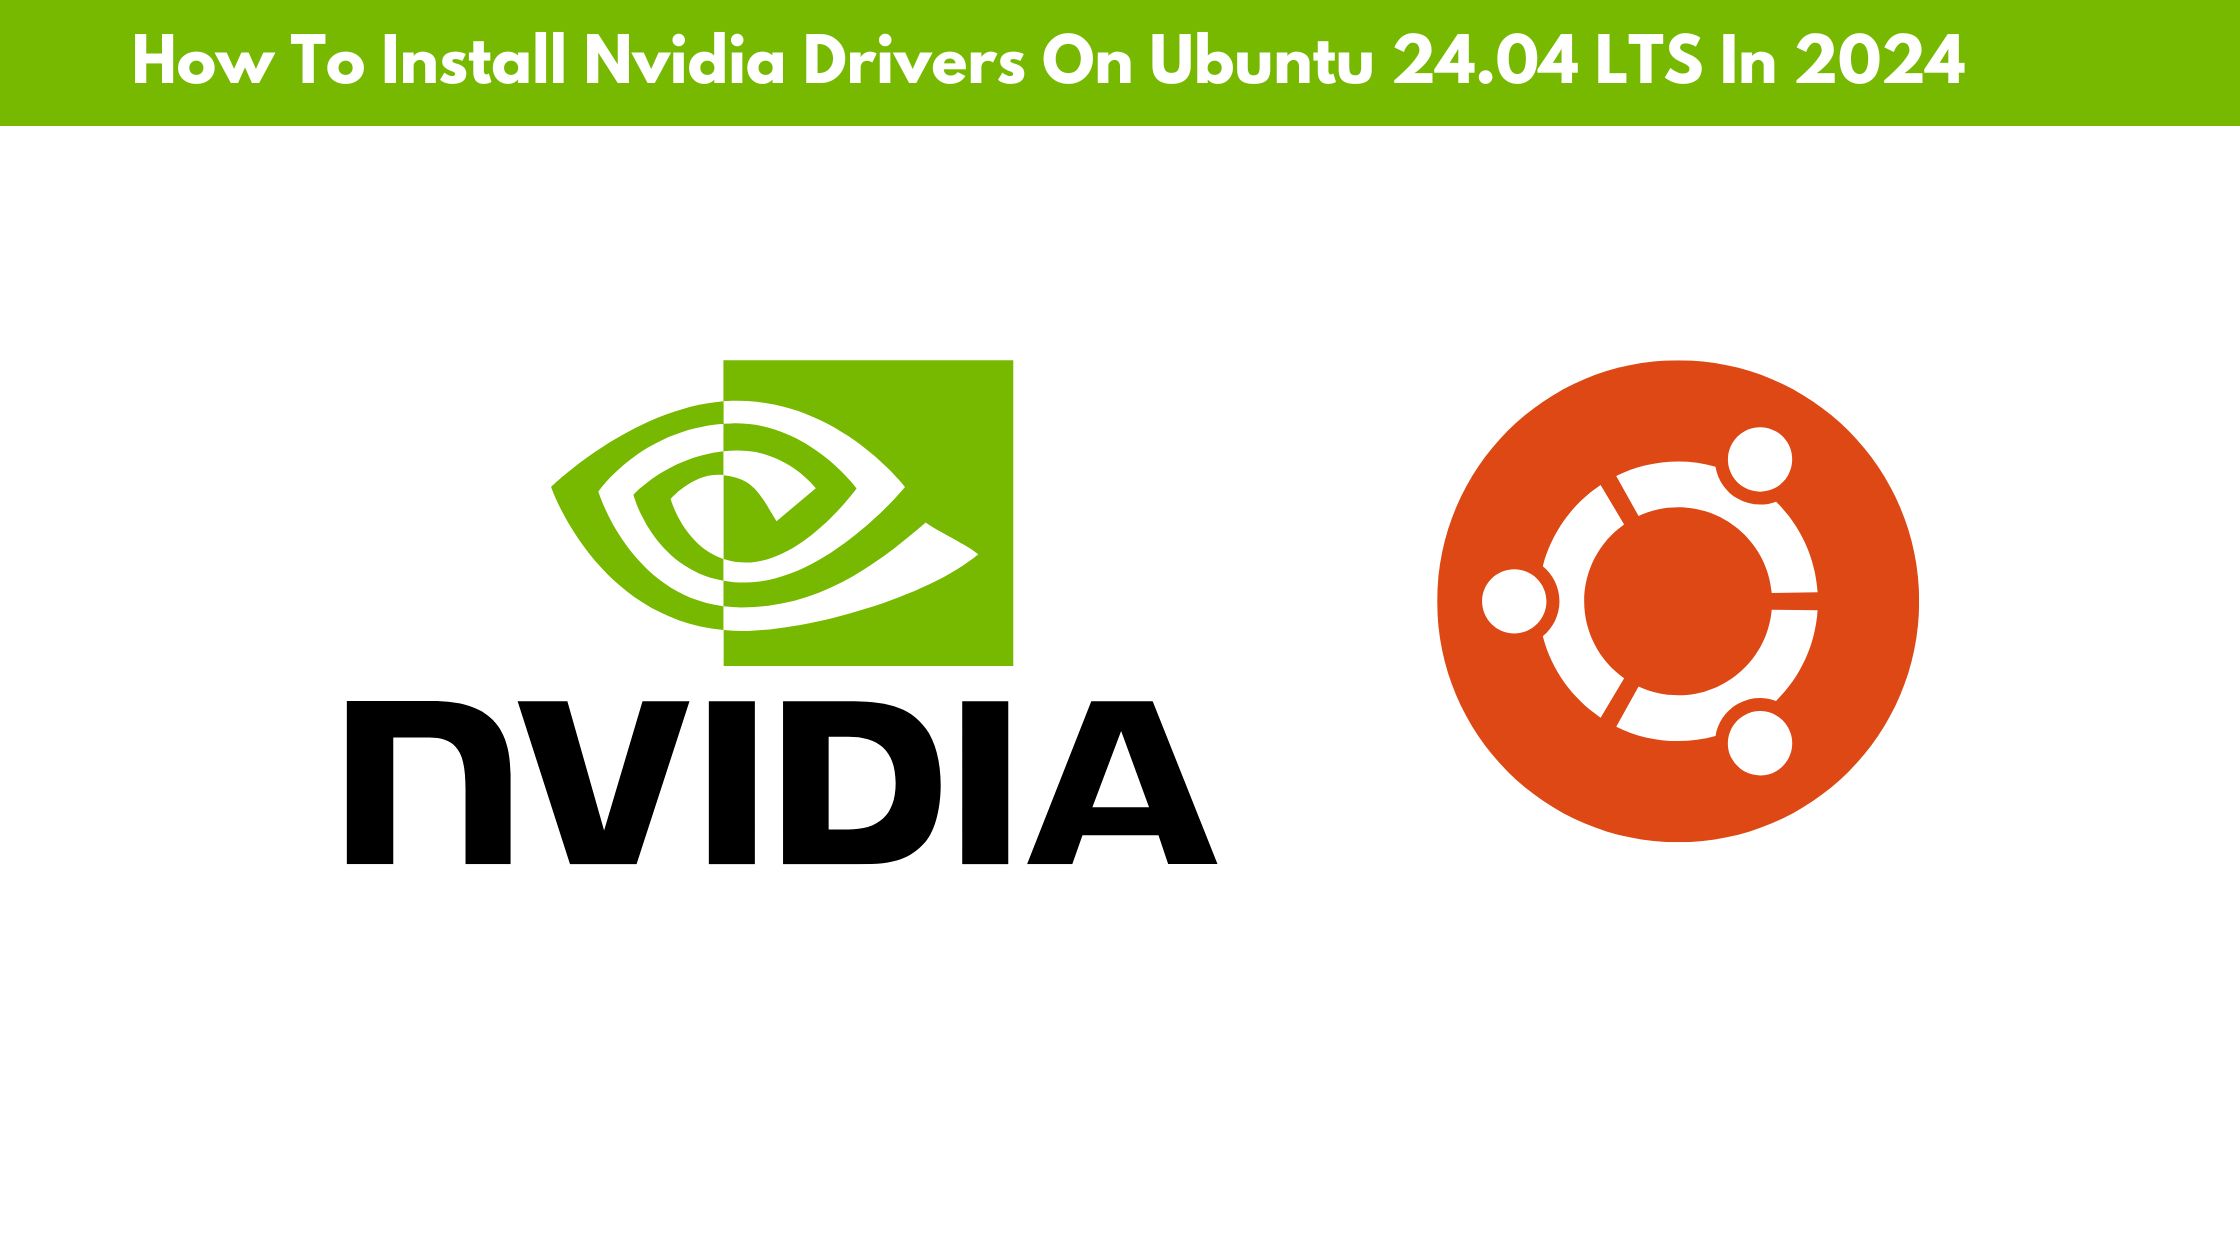 How To Install Nvidia Drivers On Ubuntu 24.04 LTS In 2024